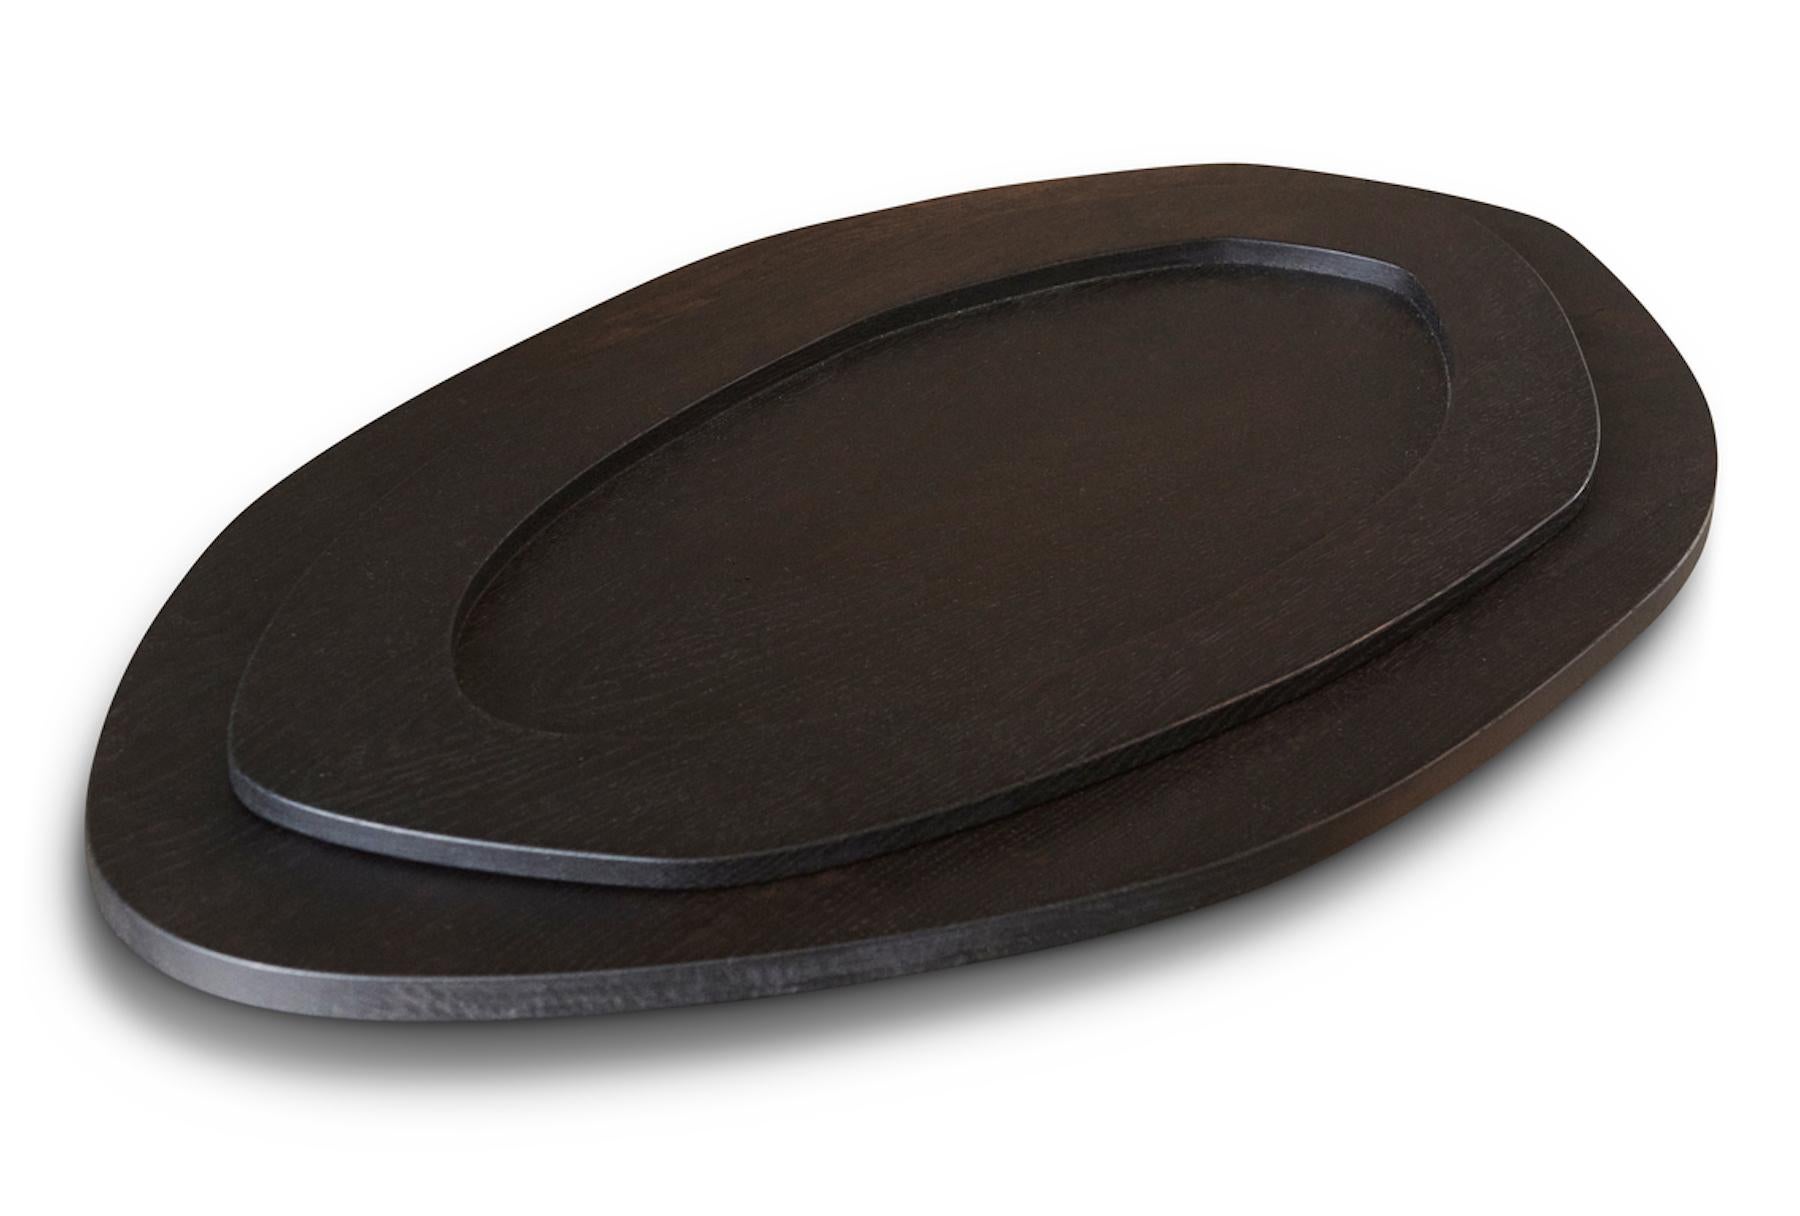 C + J Oak Tray by Fora Projects 
Designed by Christian + Jade

Material: Oak wood 
Color: Black brown
Brown surface treatment with non-toxic hardwax oil

Dimensions: (Medium) 
H. 3 - L. 73 - W. 35 cm 

_______________

The C + J tray was designed by